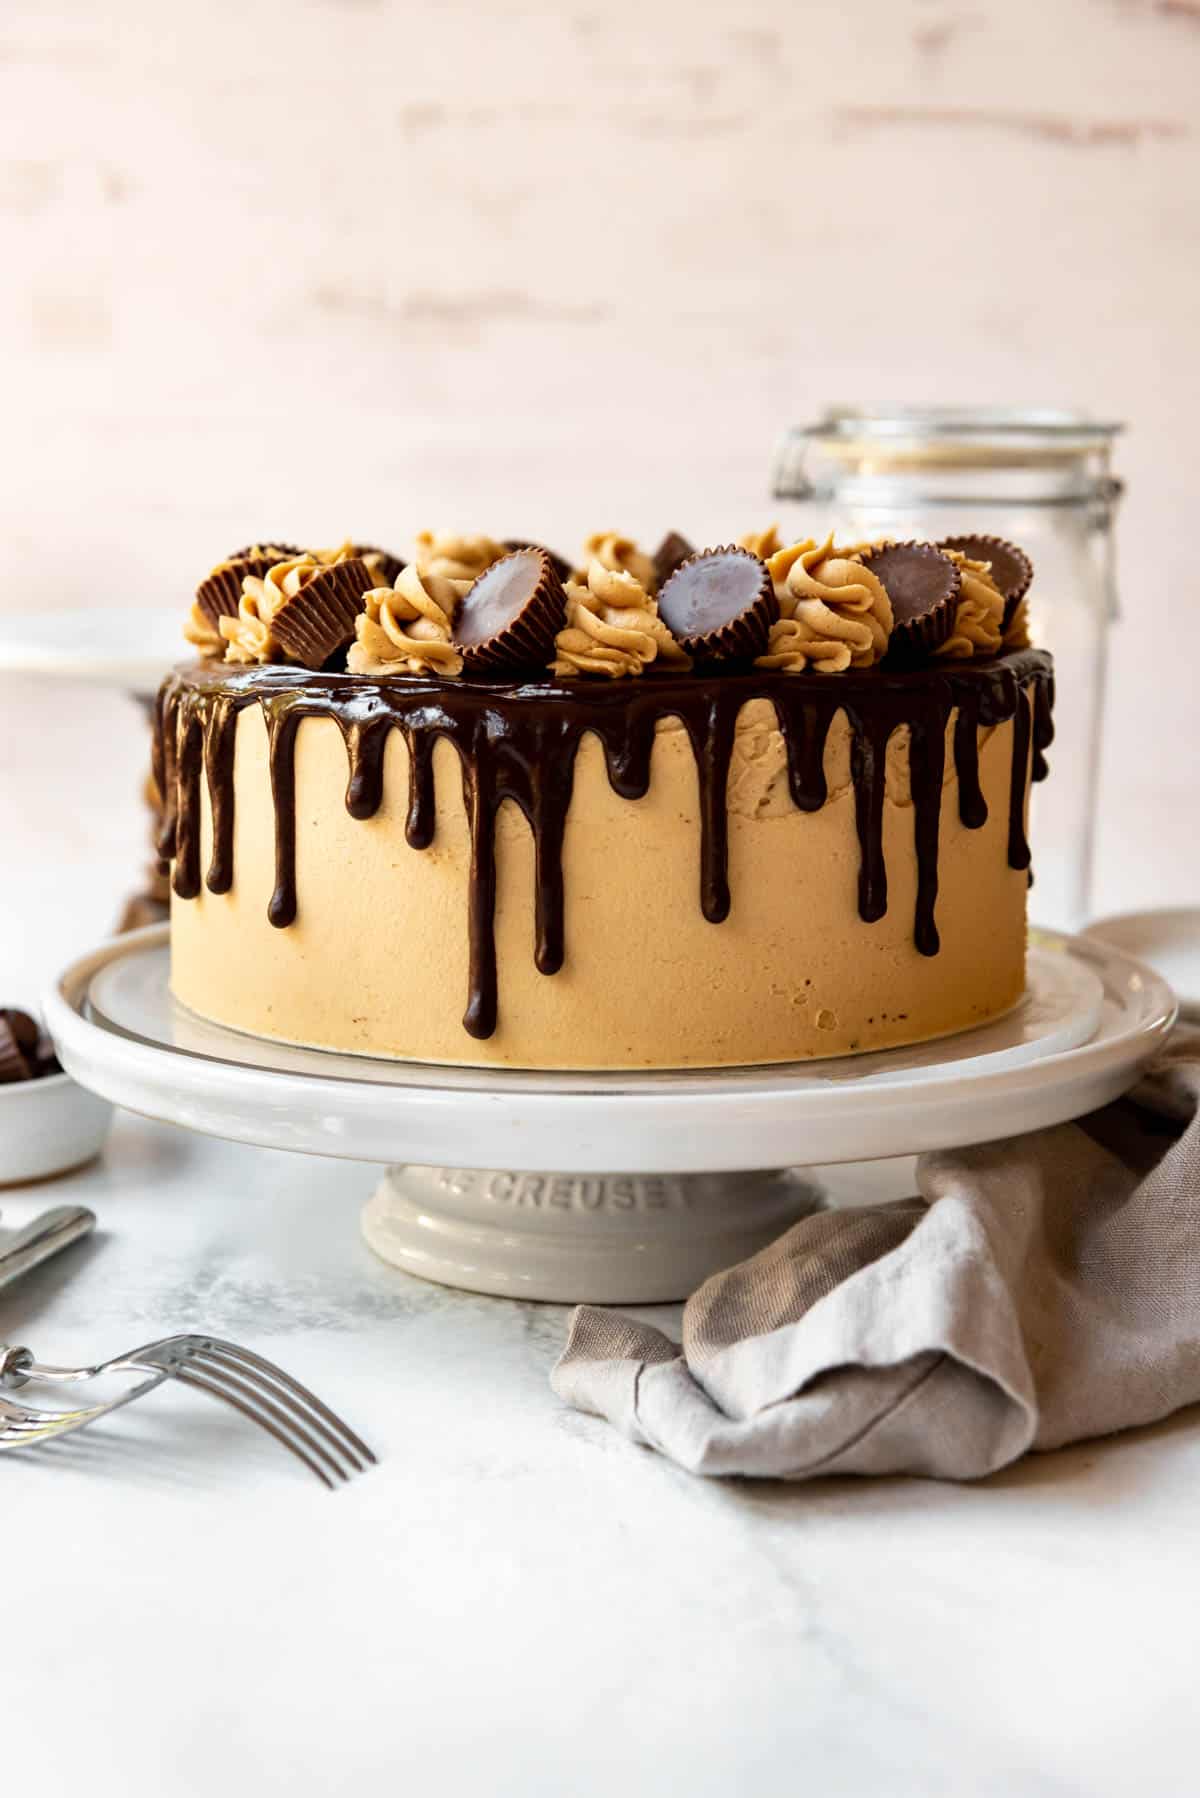 A chocolate peanut butter cake on a white cake stand.